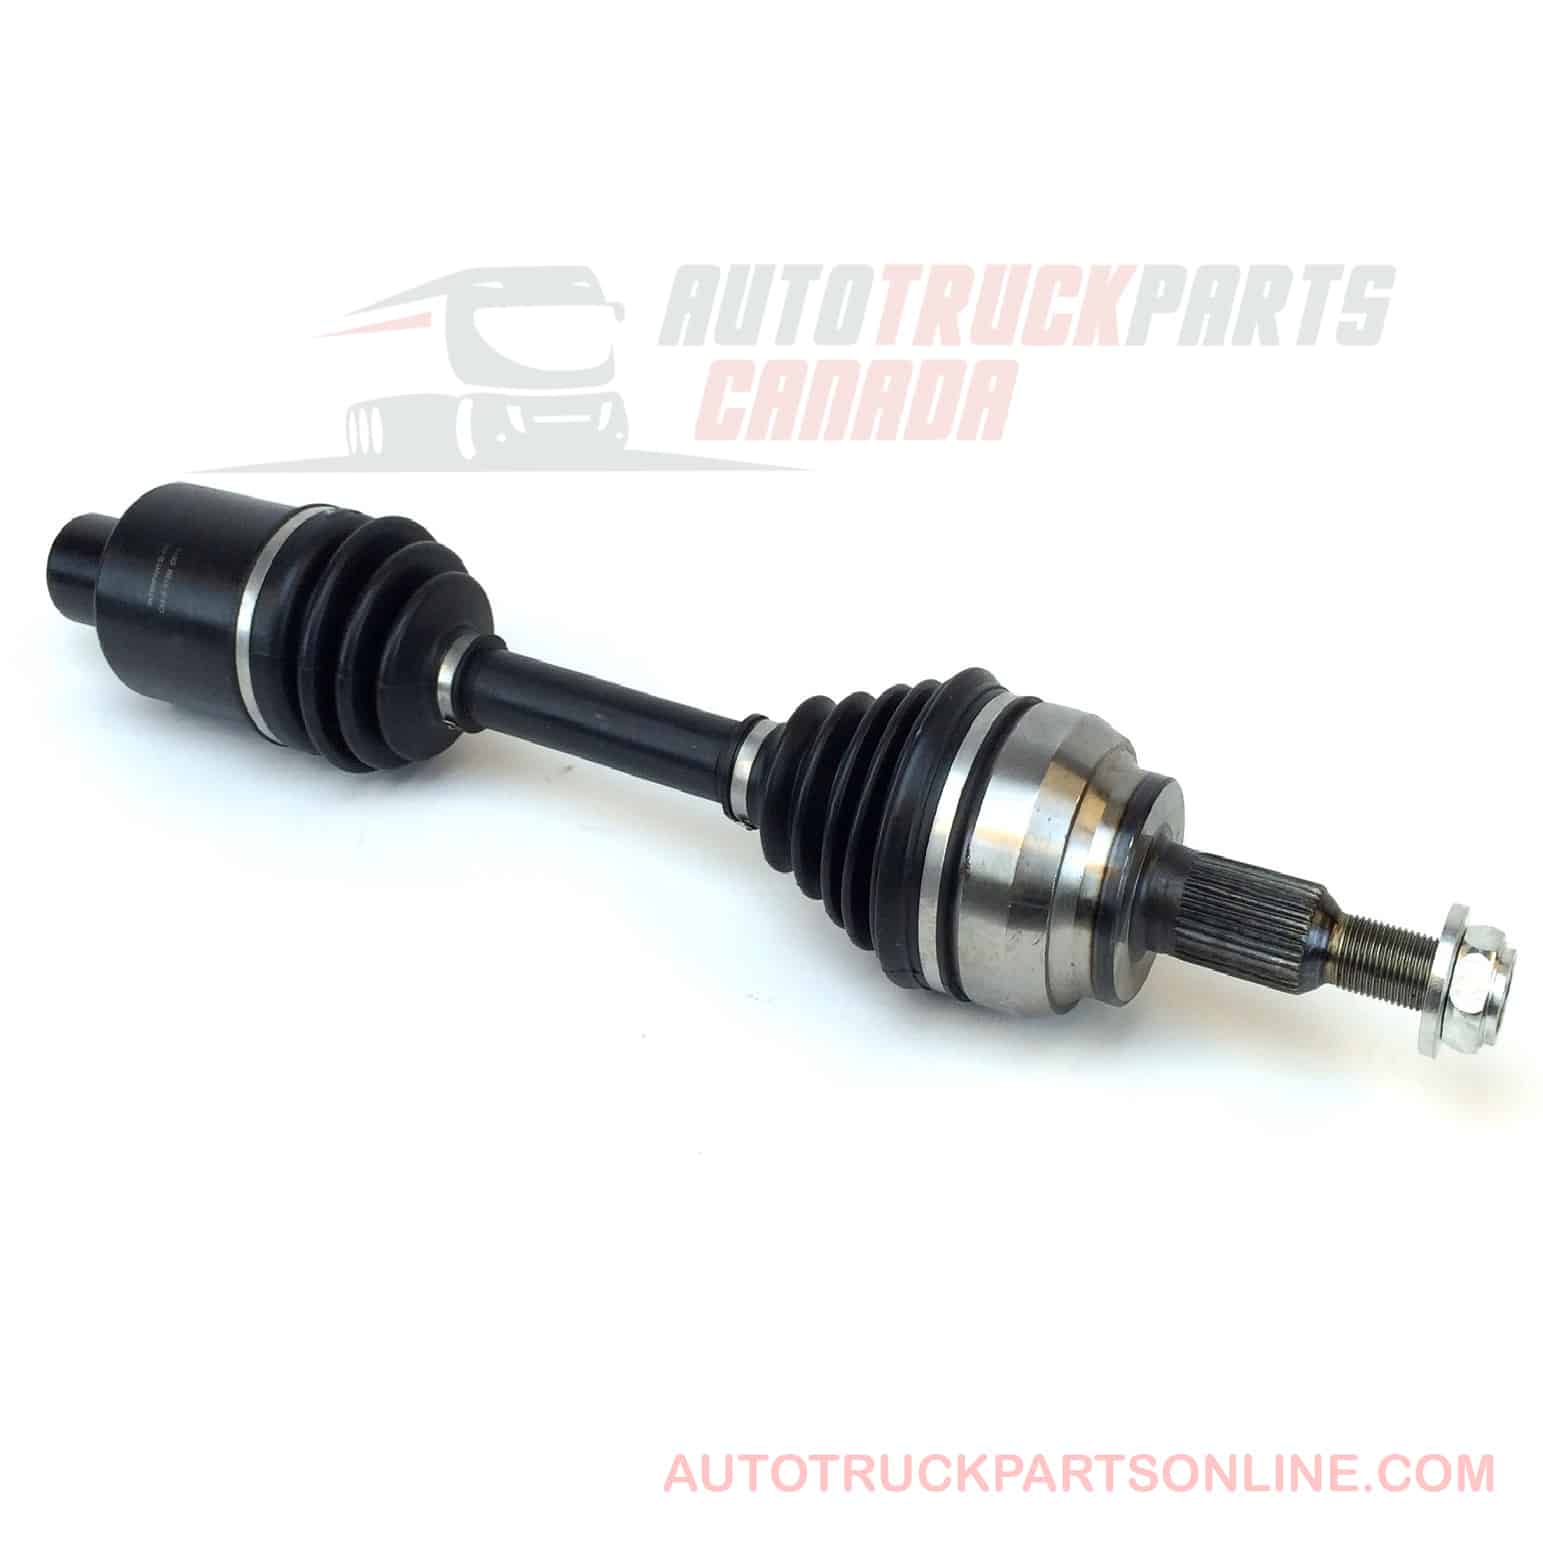 TZAUTMAC,Front Right Left CV Axle Shaft Assembly for Dodge Ram 1500 2002 2003 2004 2005 4WD,Cv Half Shaft Assembly 